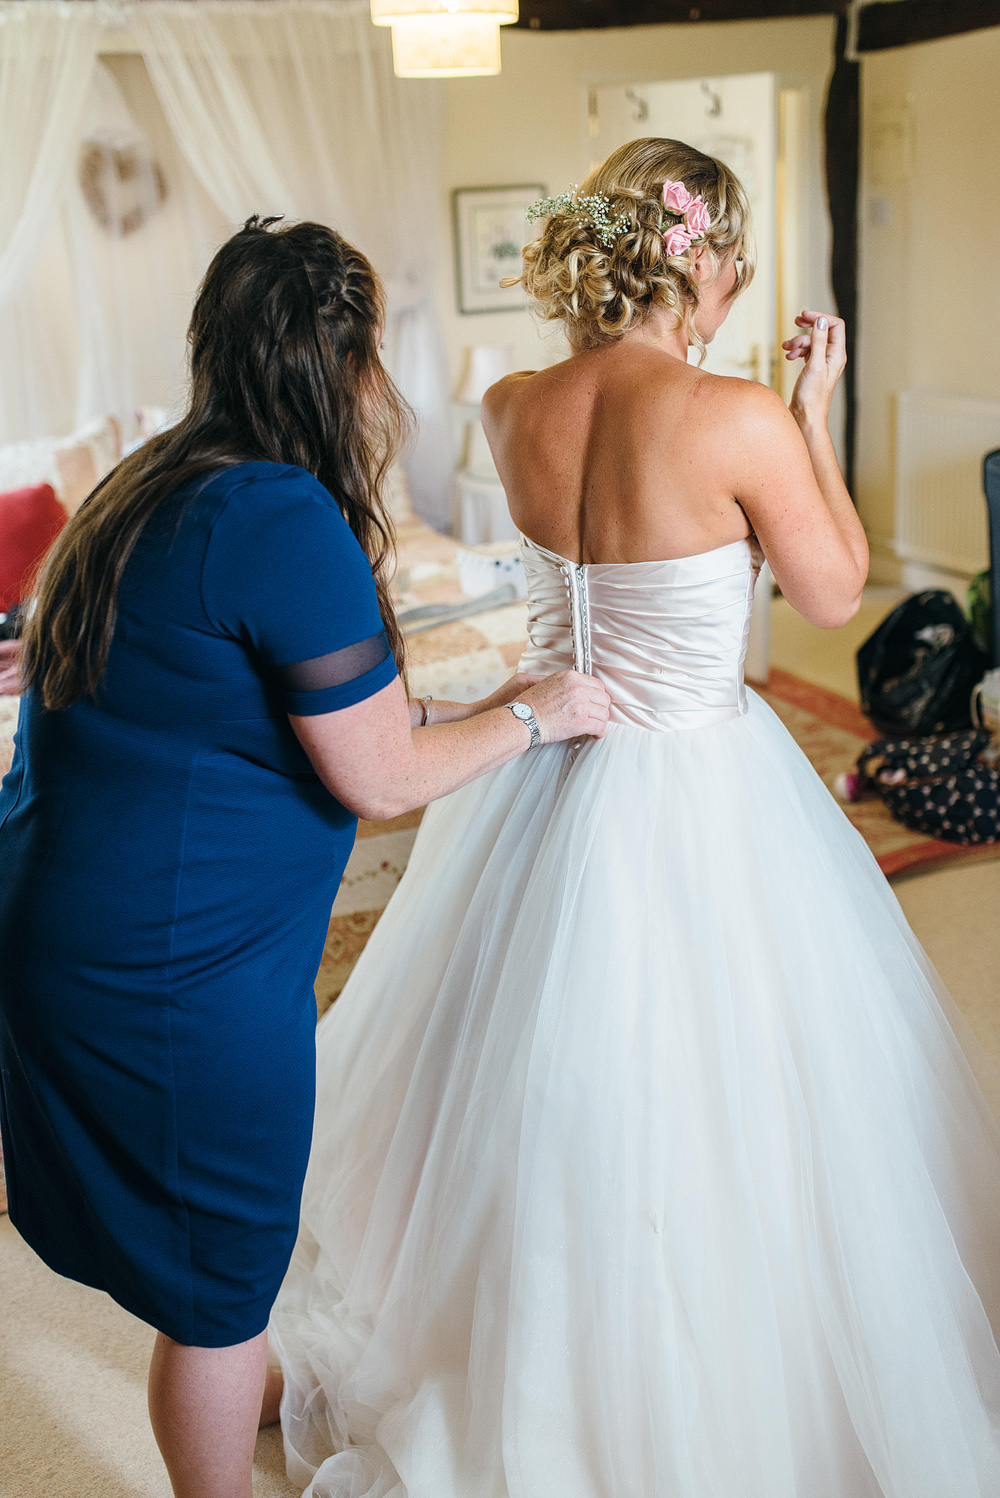 Guest helping bride get into dress